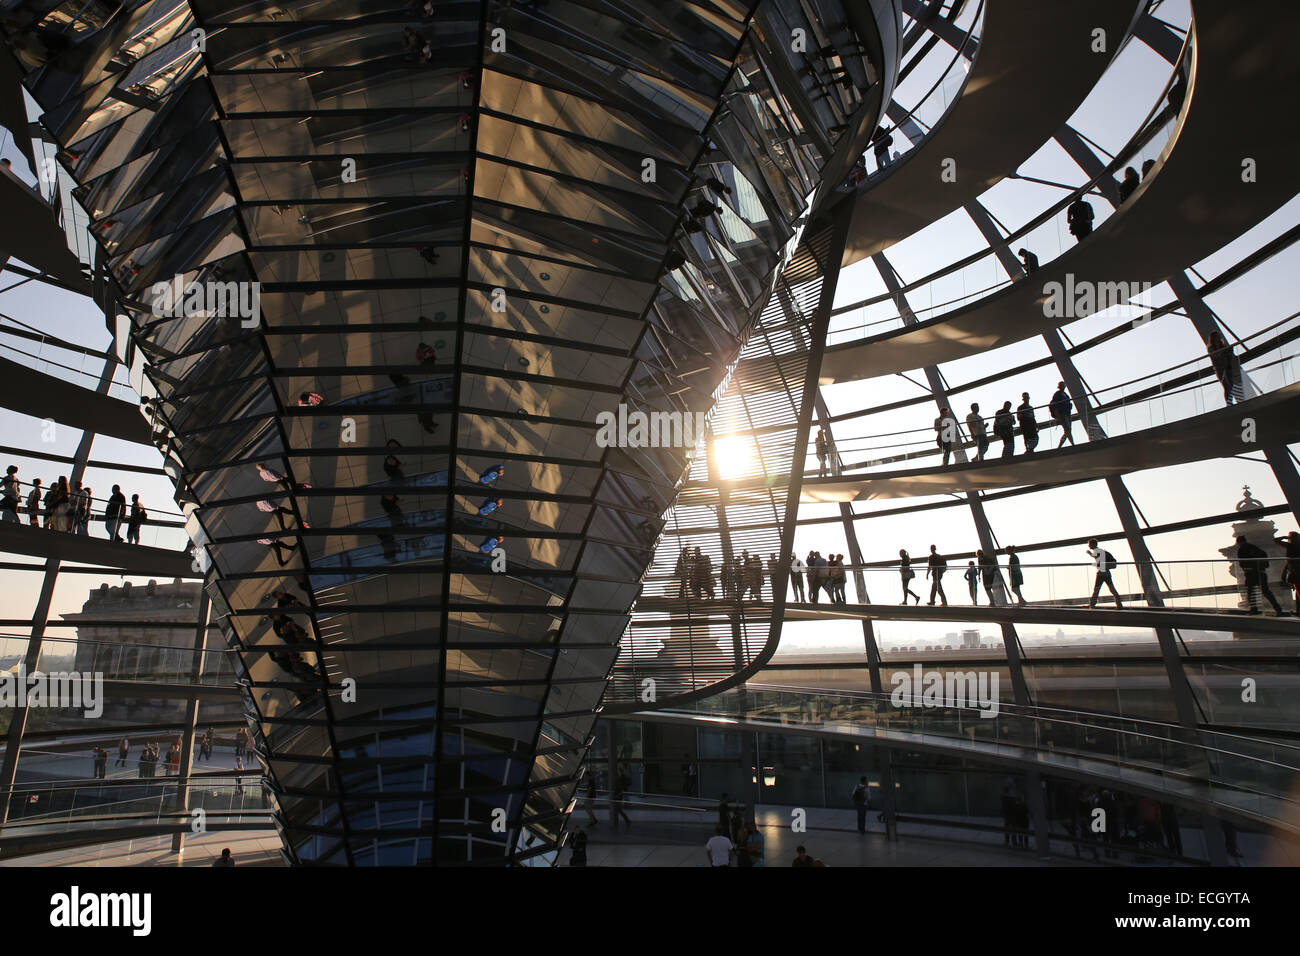 Reichstag dome interior Berlin Germany Stock Photo